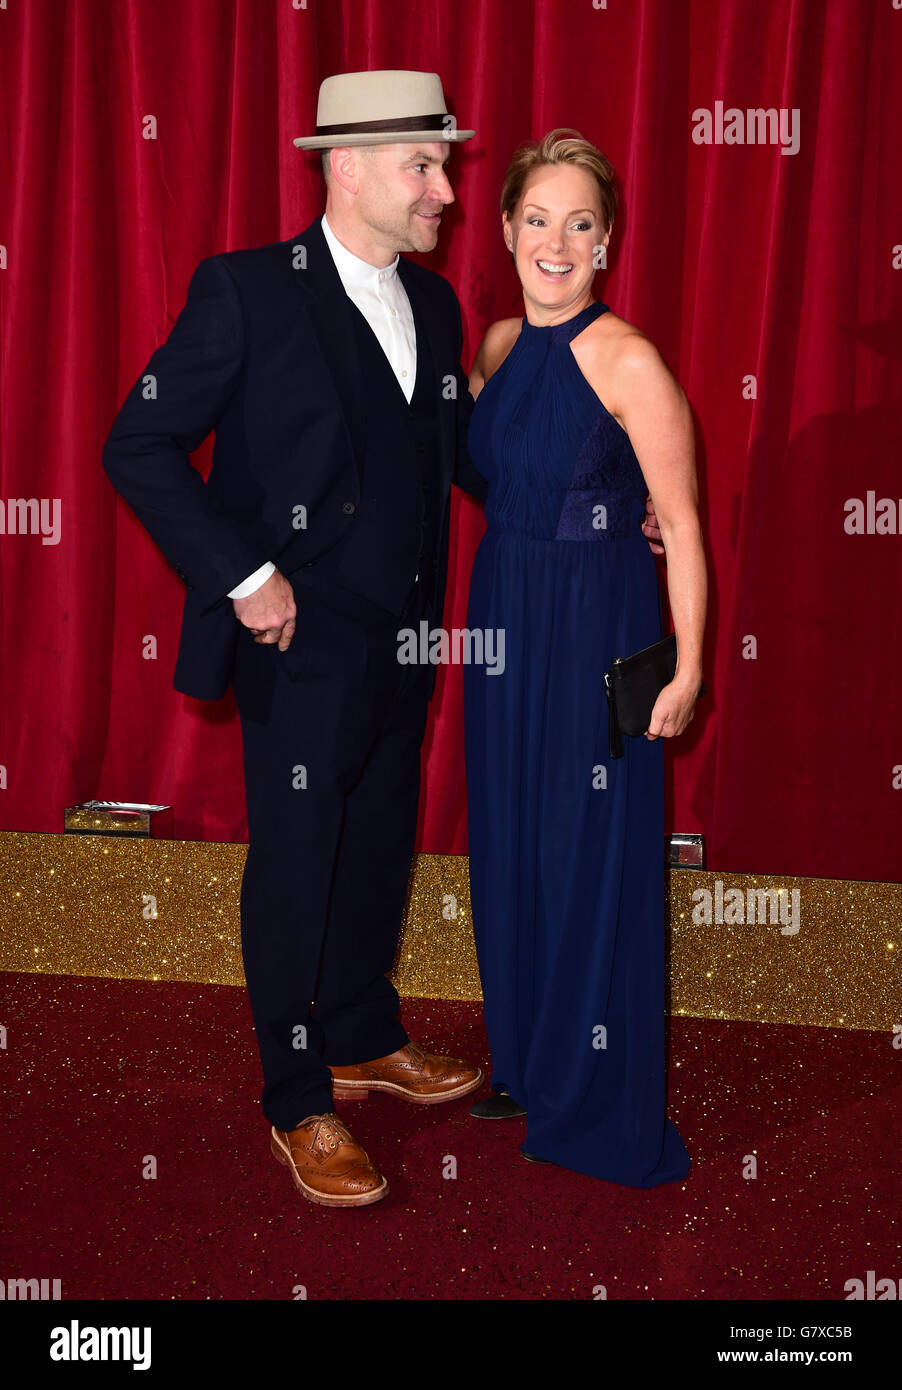 Sally Dynevor and Joe Duttine attending the British Soap Awards at the Palace Hotel, Manchester. Stock Photo